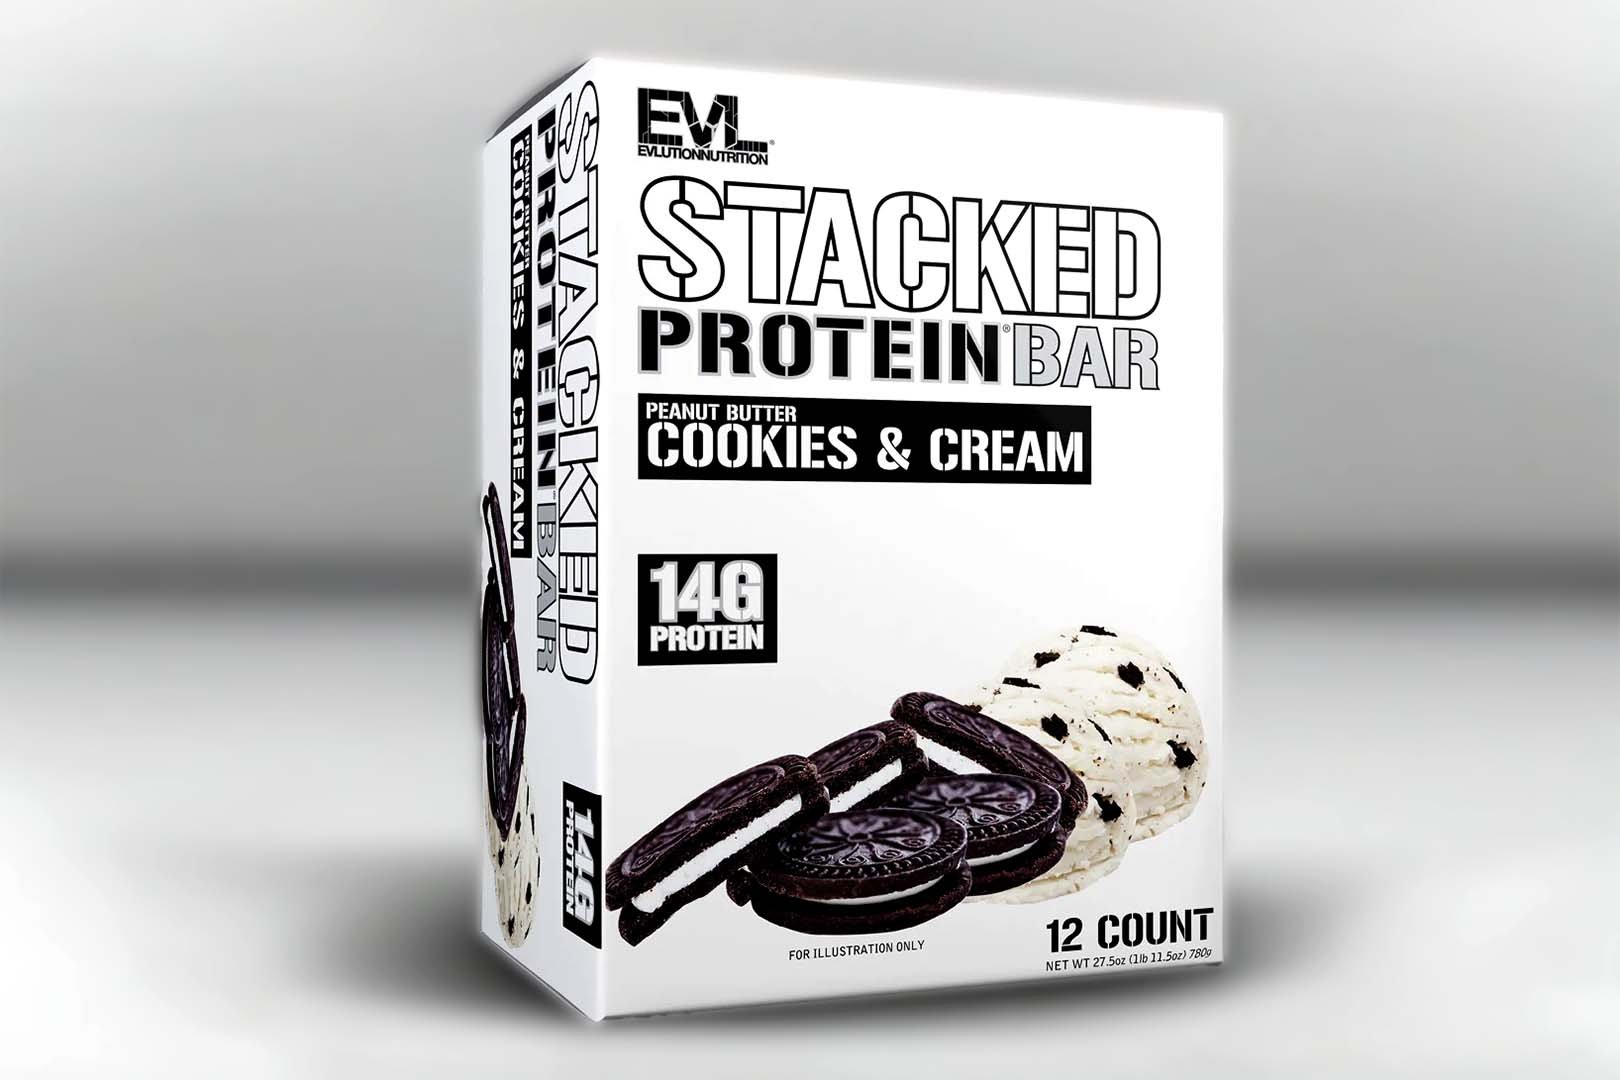 Where To Buy Evl Stacked Protein Bar